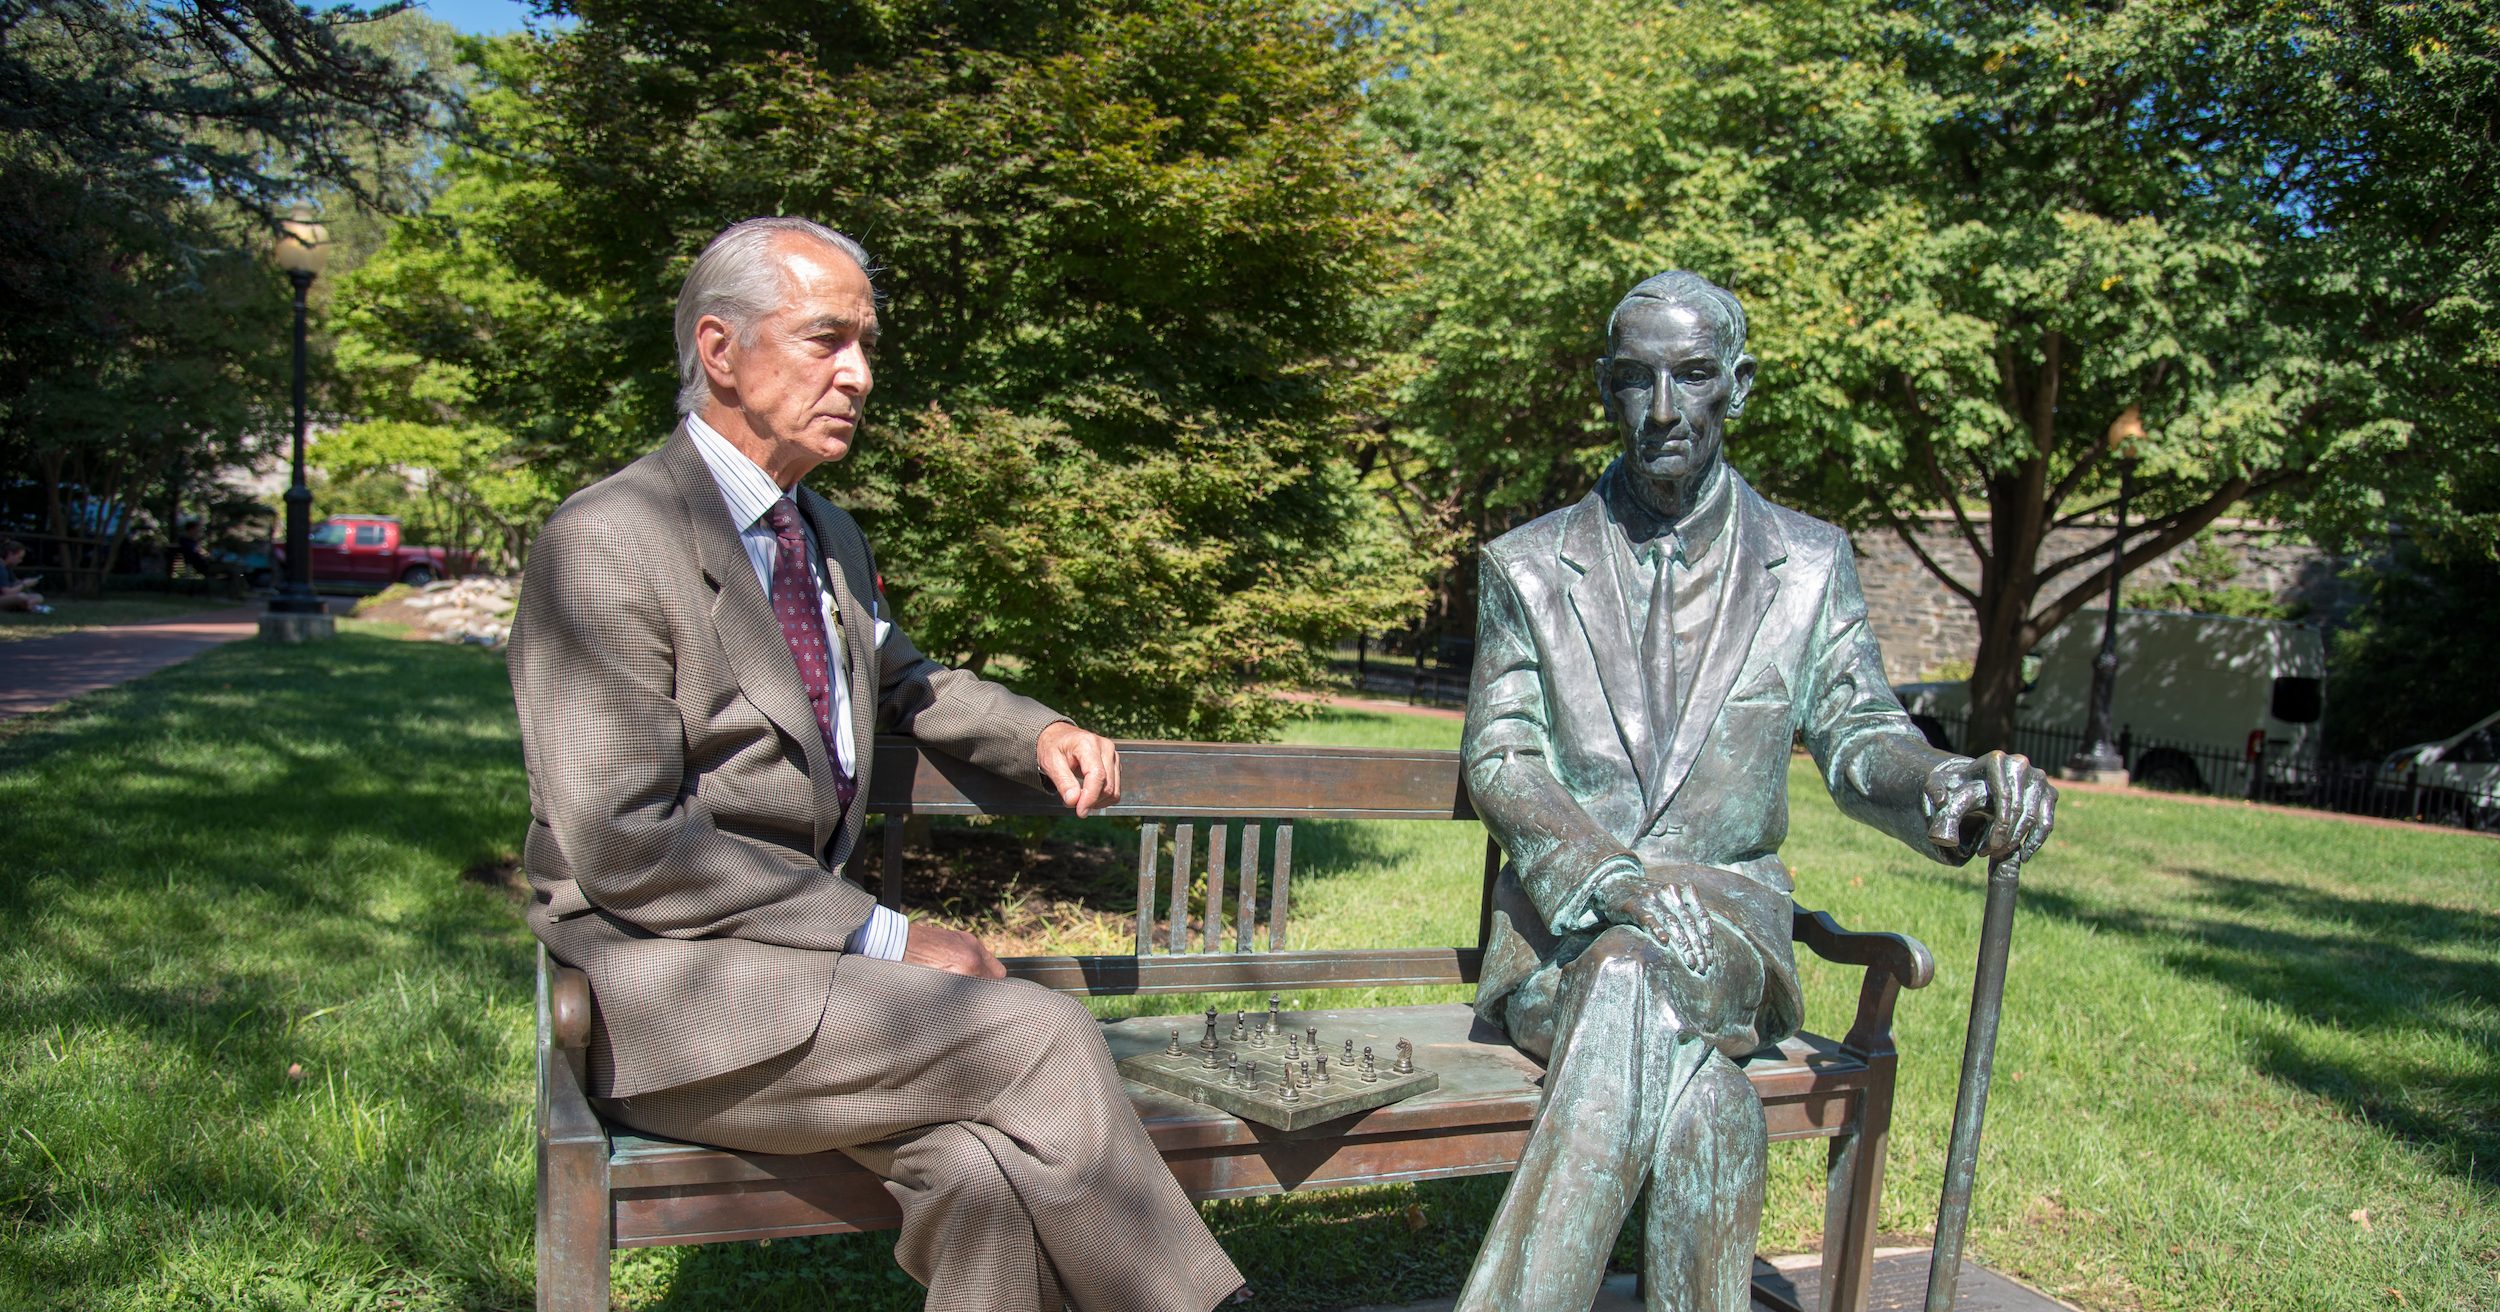 Strathairn as Karski sits on a bench next to a greening Karski statue with a cane